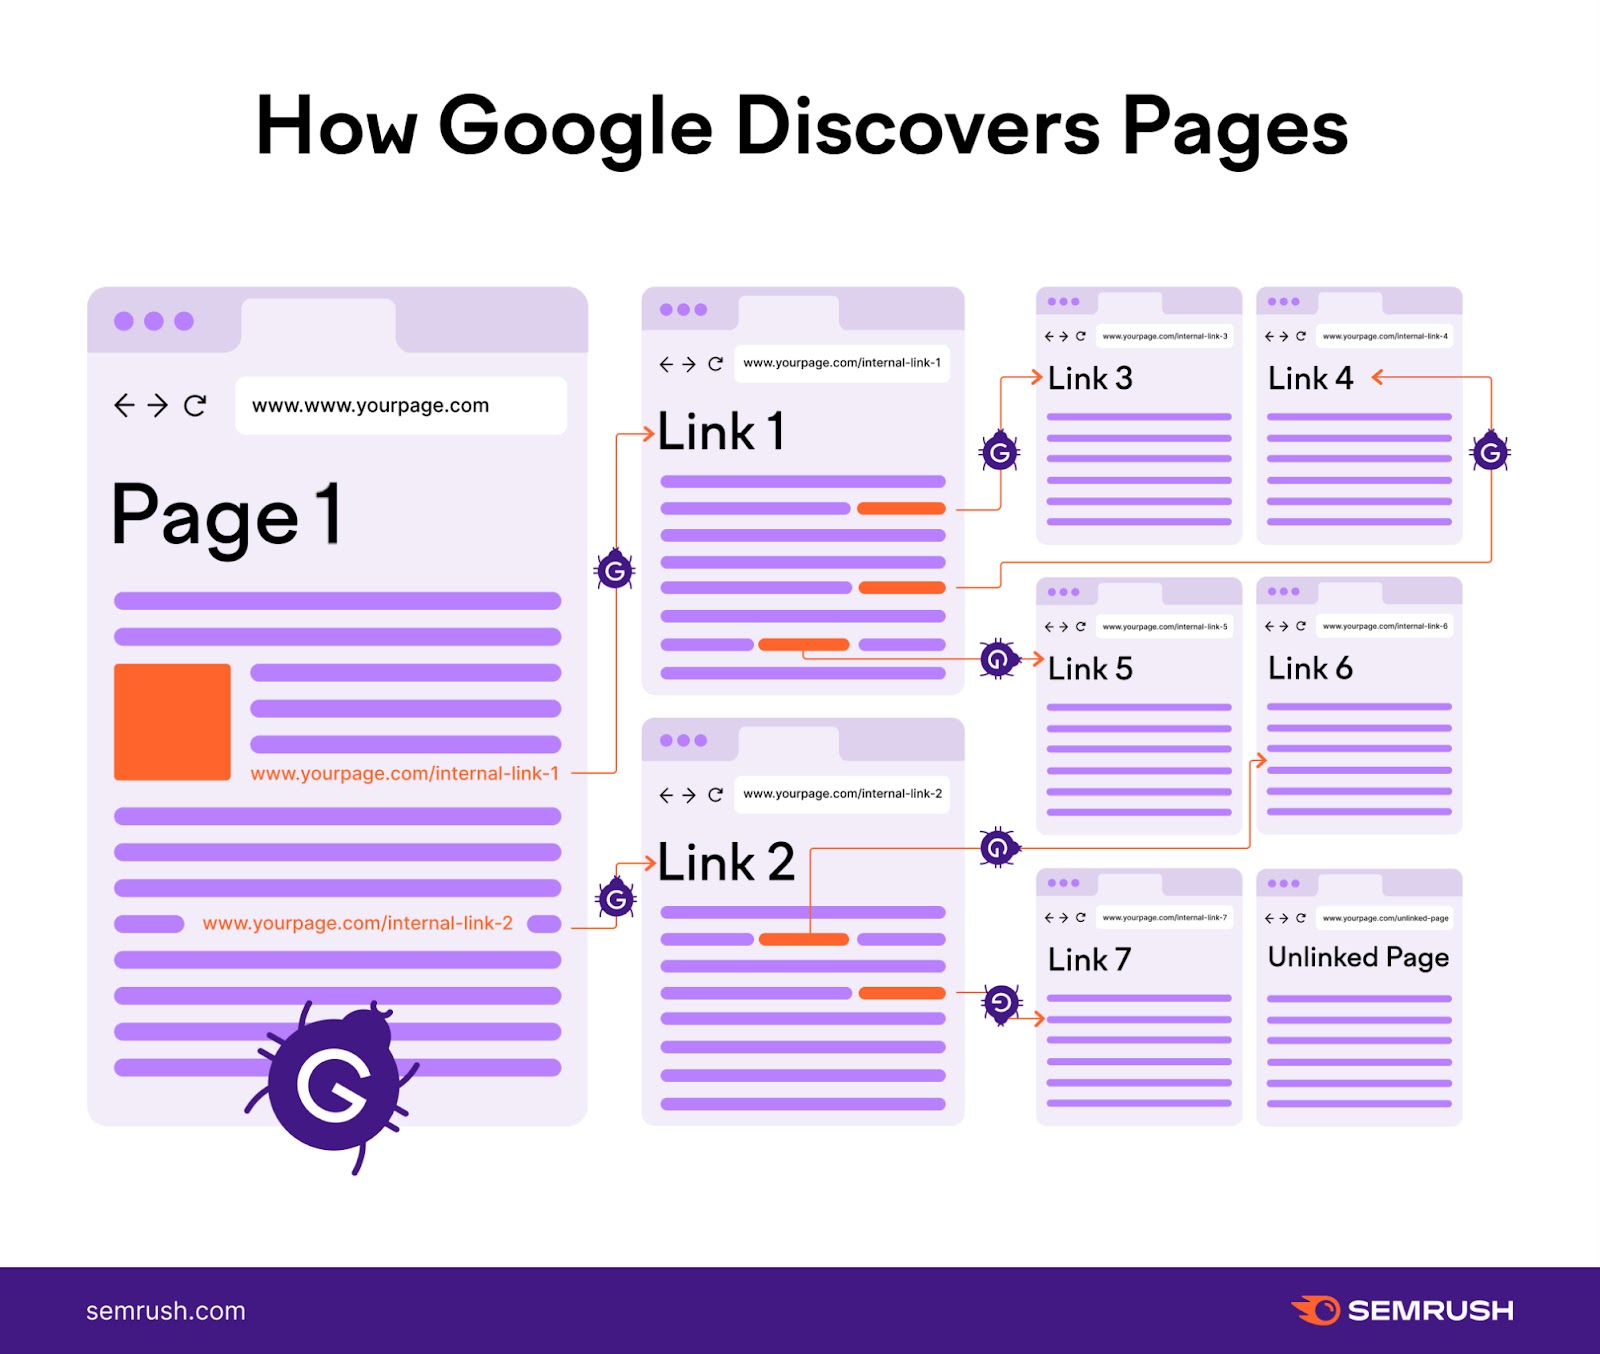 A visual showing how Google discovers pages